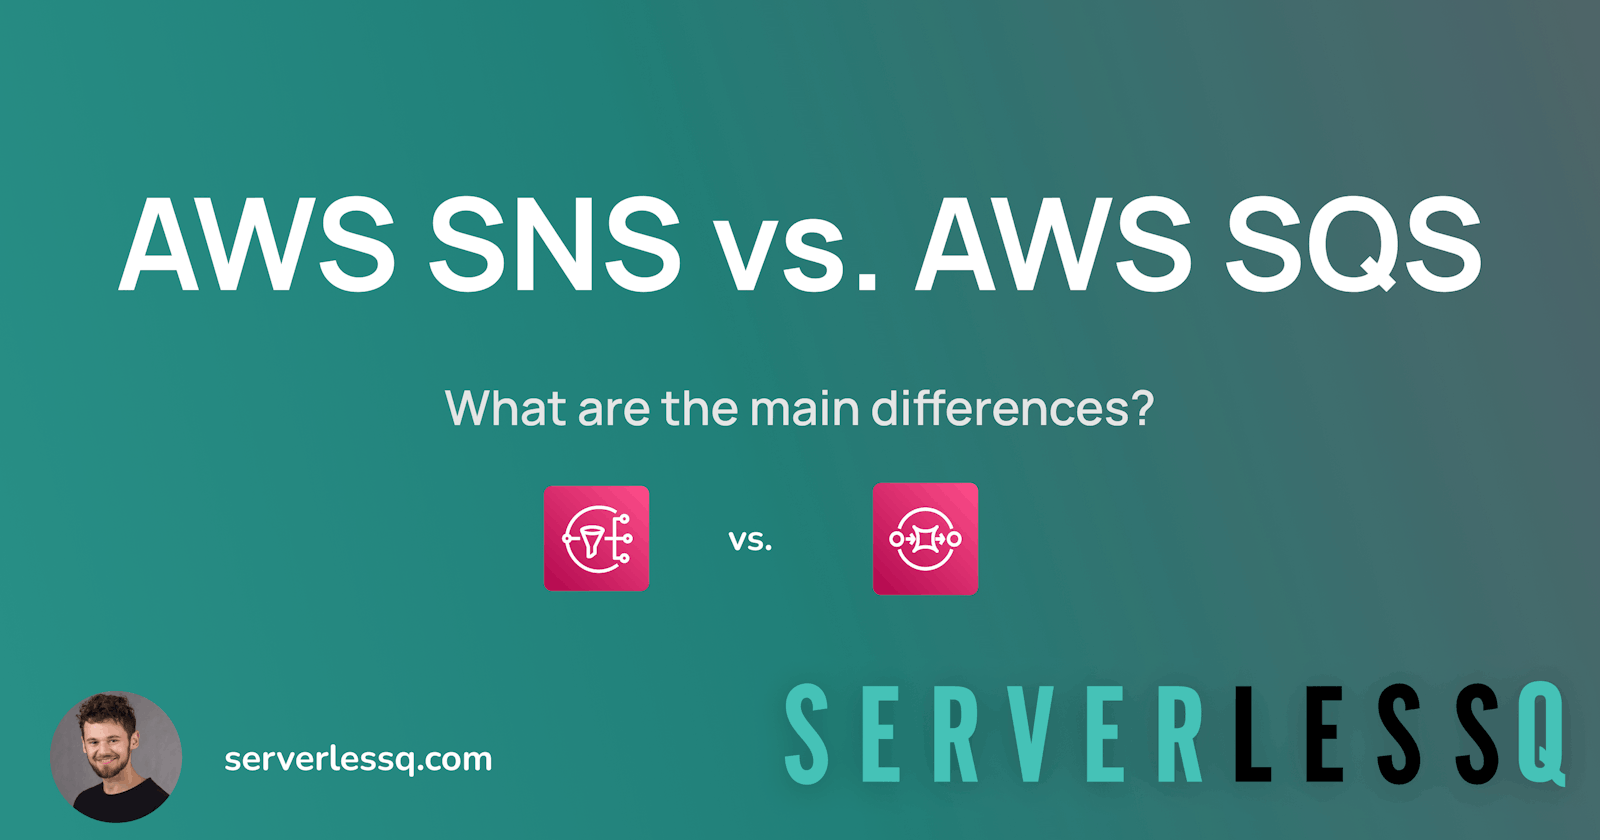 AWS SNS vs. SQS - What Are the Main Differences?